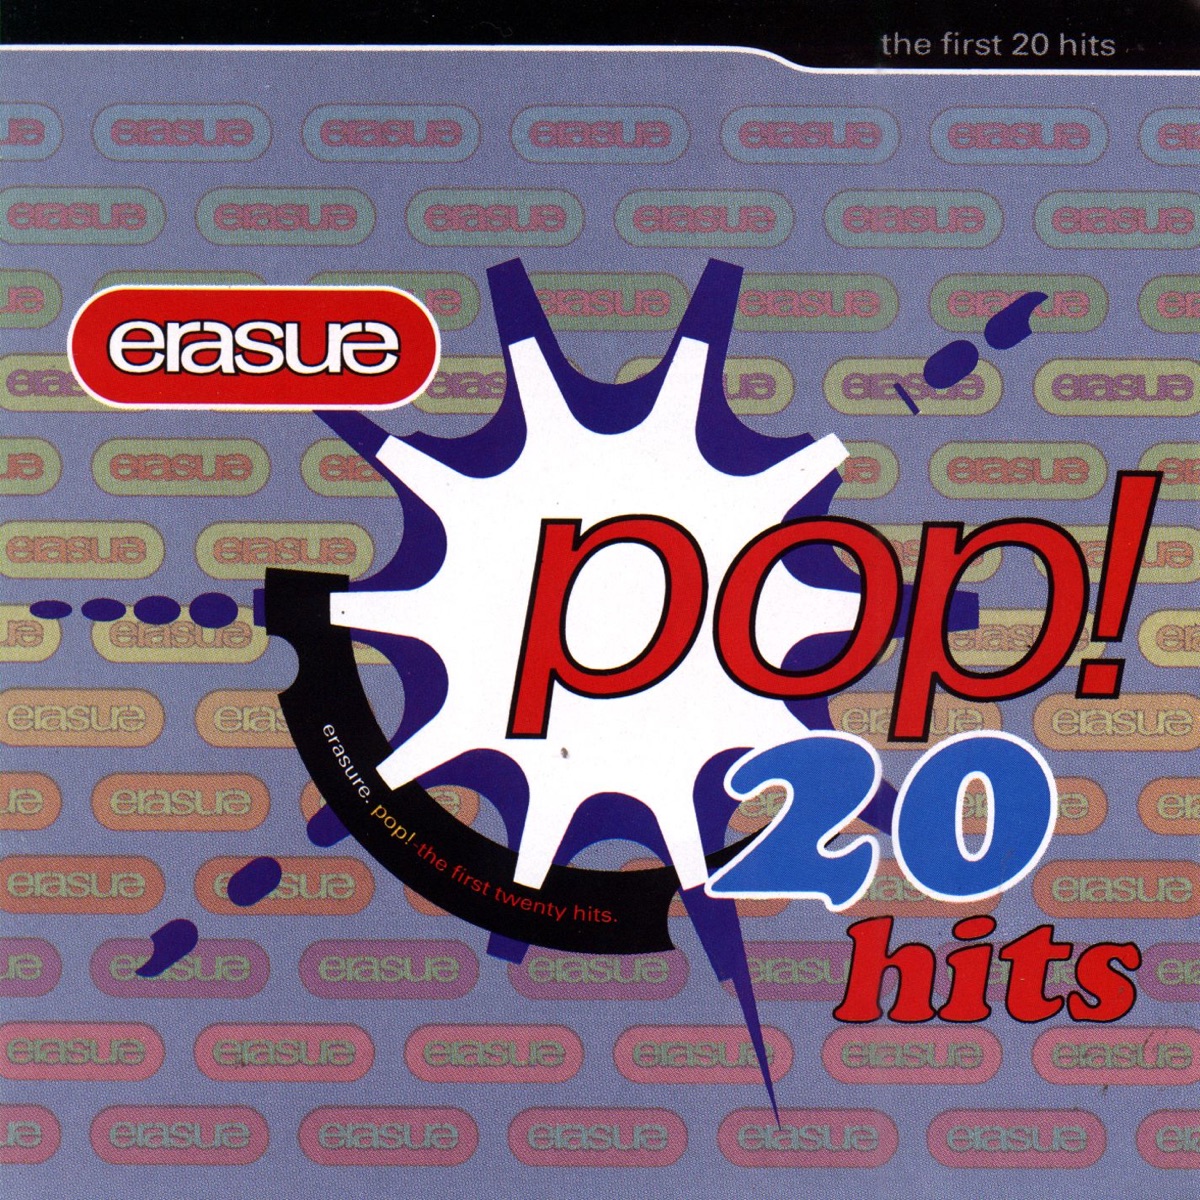 Pop! - The First 20 Hits - Album by Erasure - Apple Music